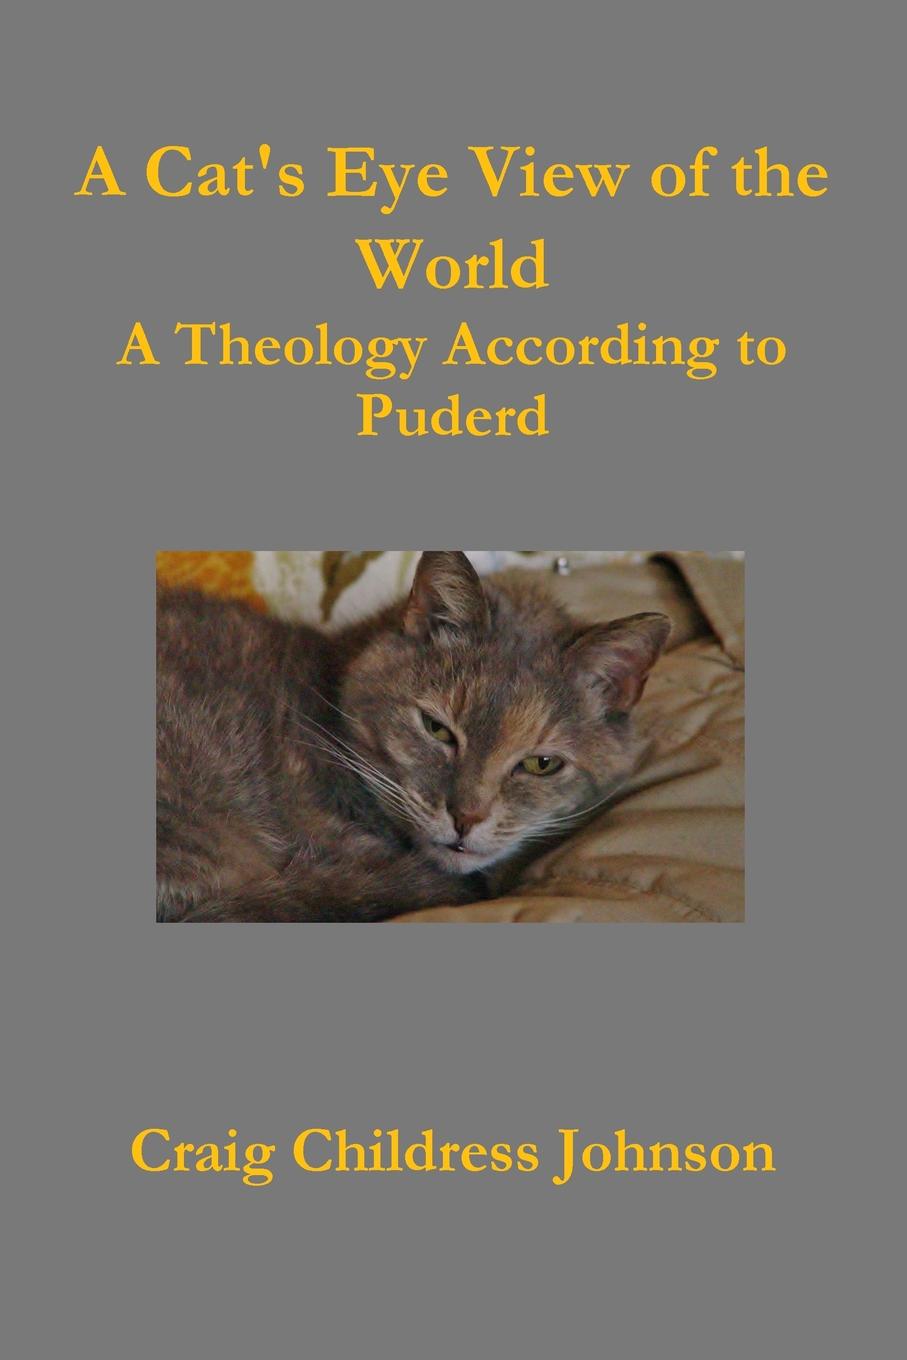 A Cat.s Eye View of the World - Theology According to Puderd